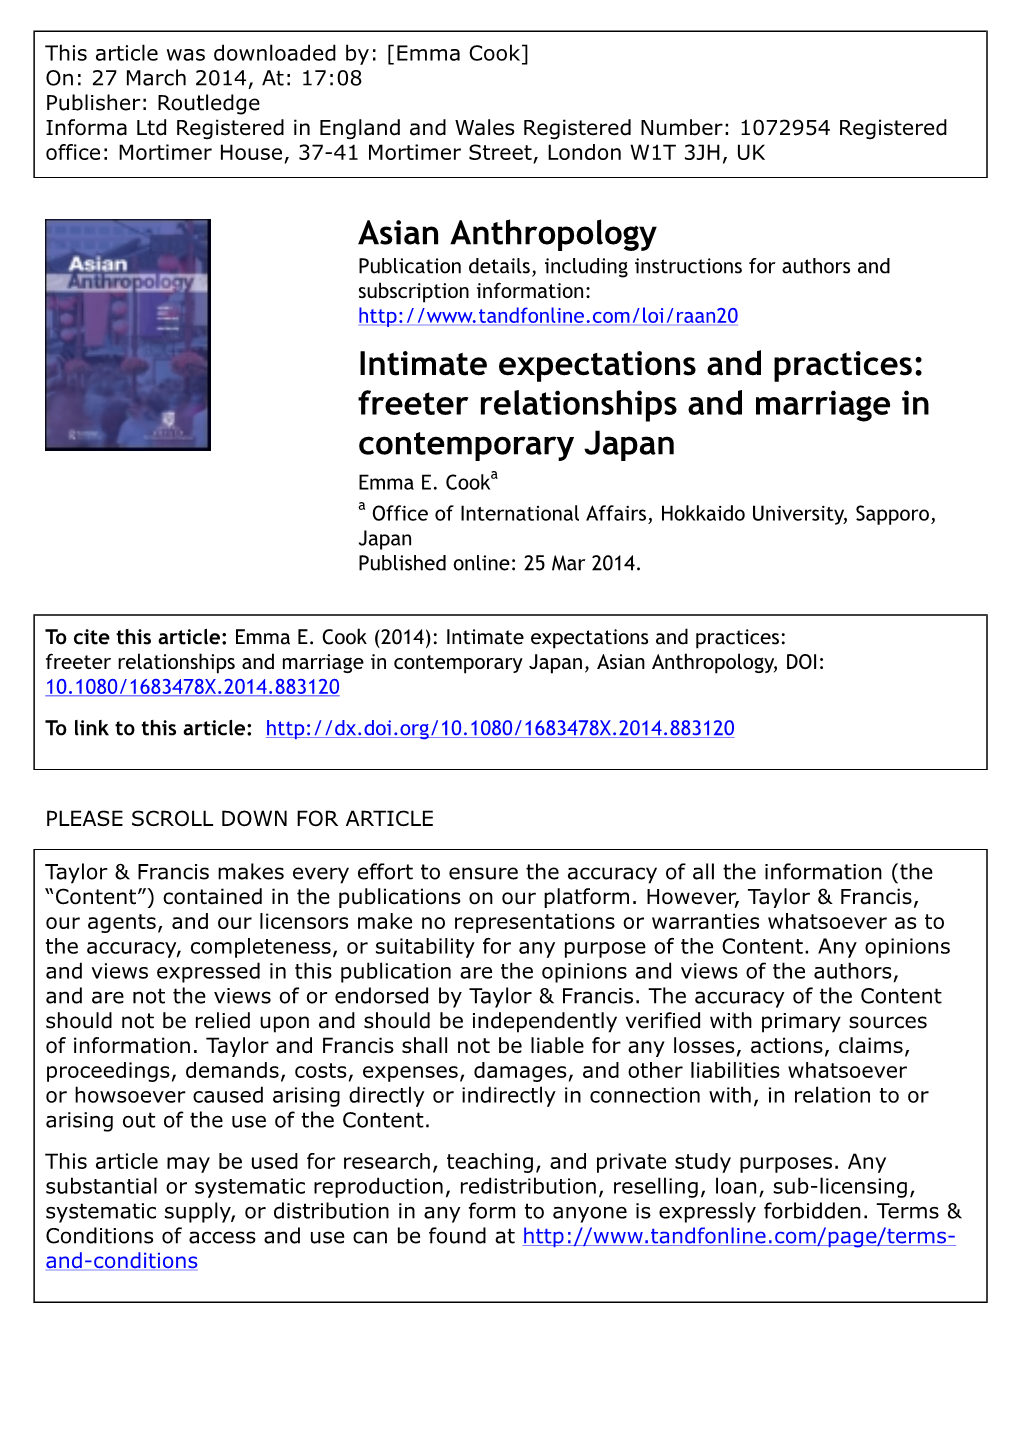 Asian Anthropology Intimate Expectations and Practices: Freeter